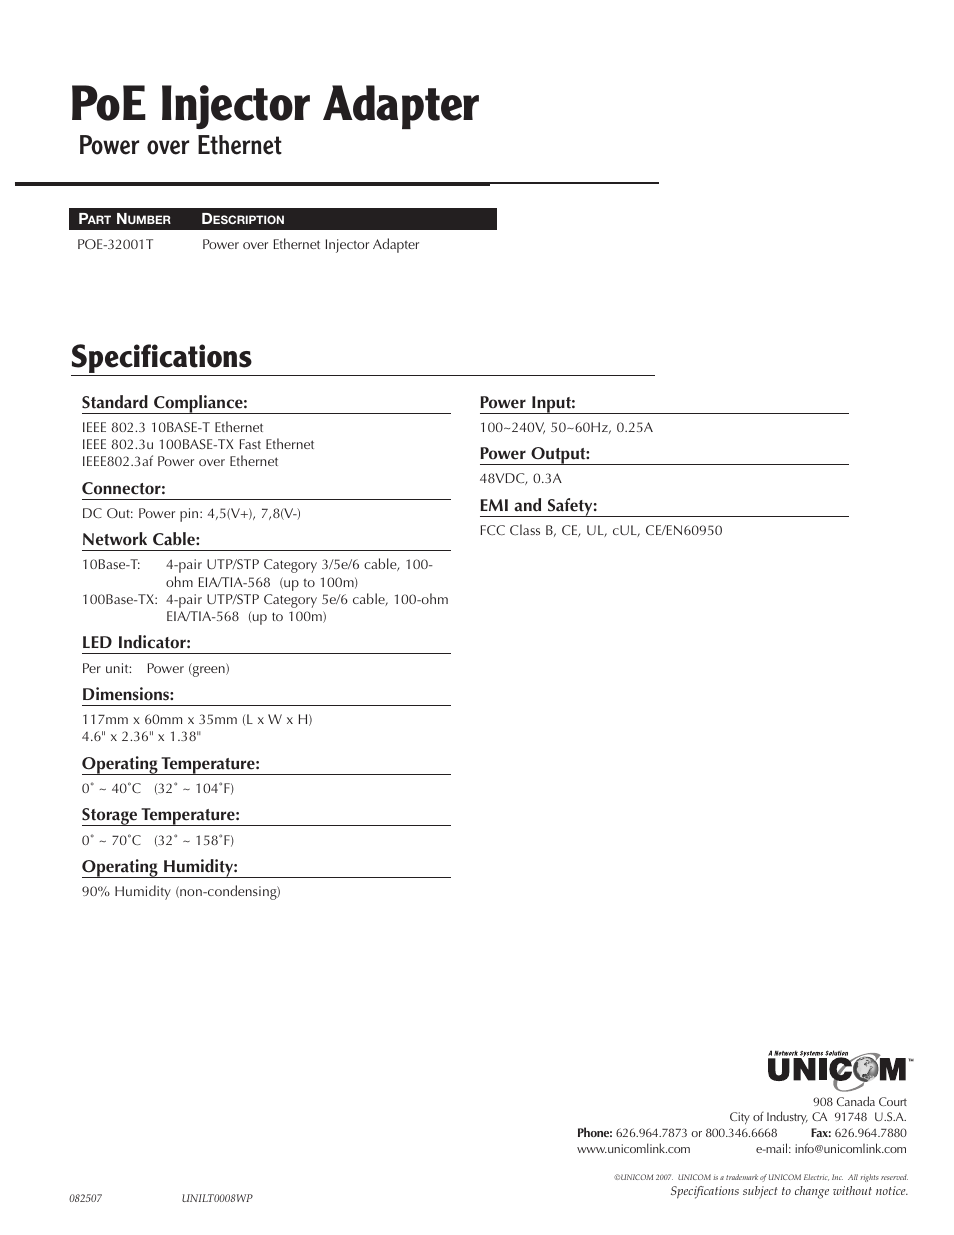 UNICOM Electric PoE Injector Adapter POE-32001T User Manual | 1 page